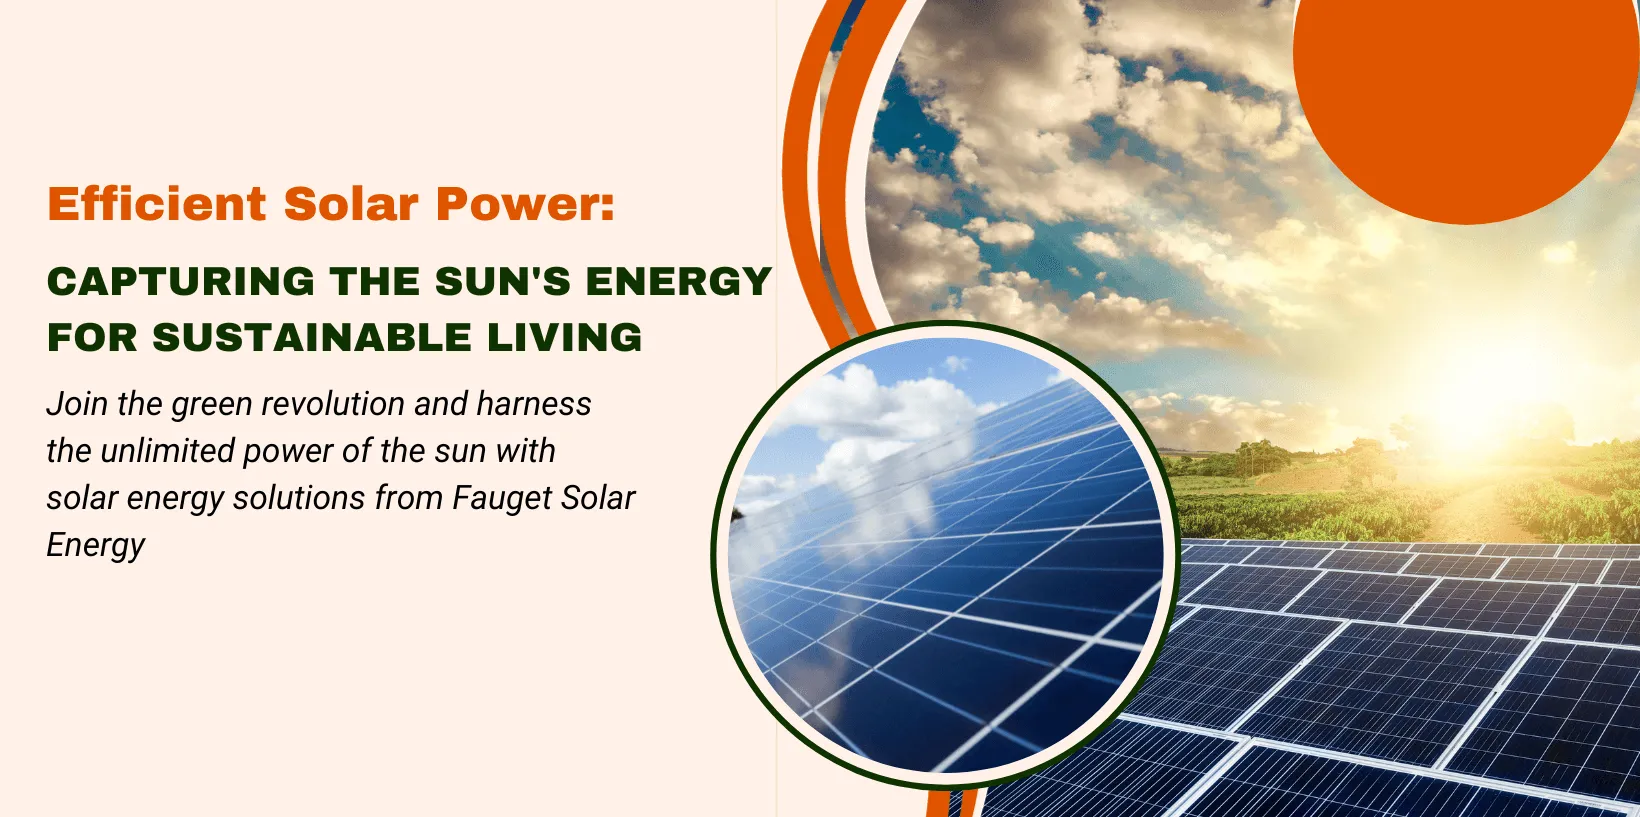 Efficient Solar Power Capturing the Sun's Energy for Sustainable Living